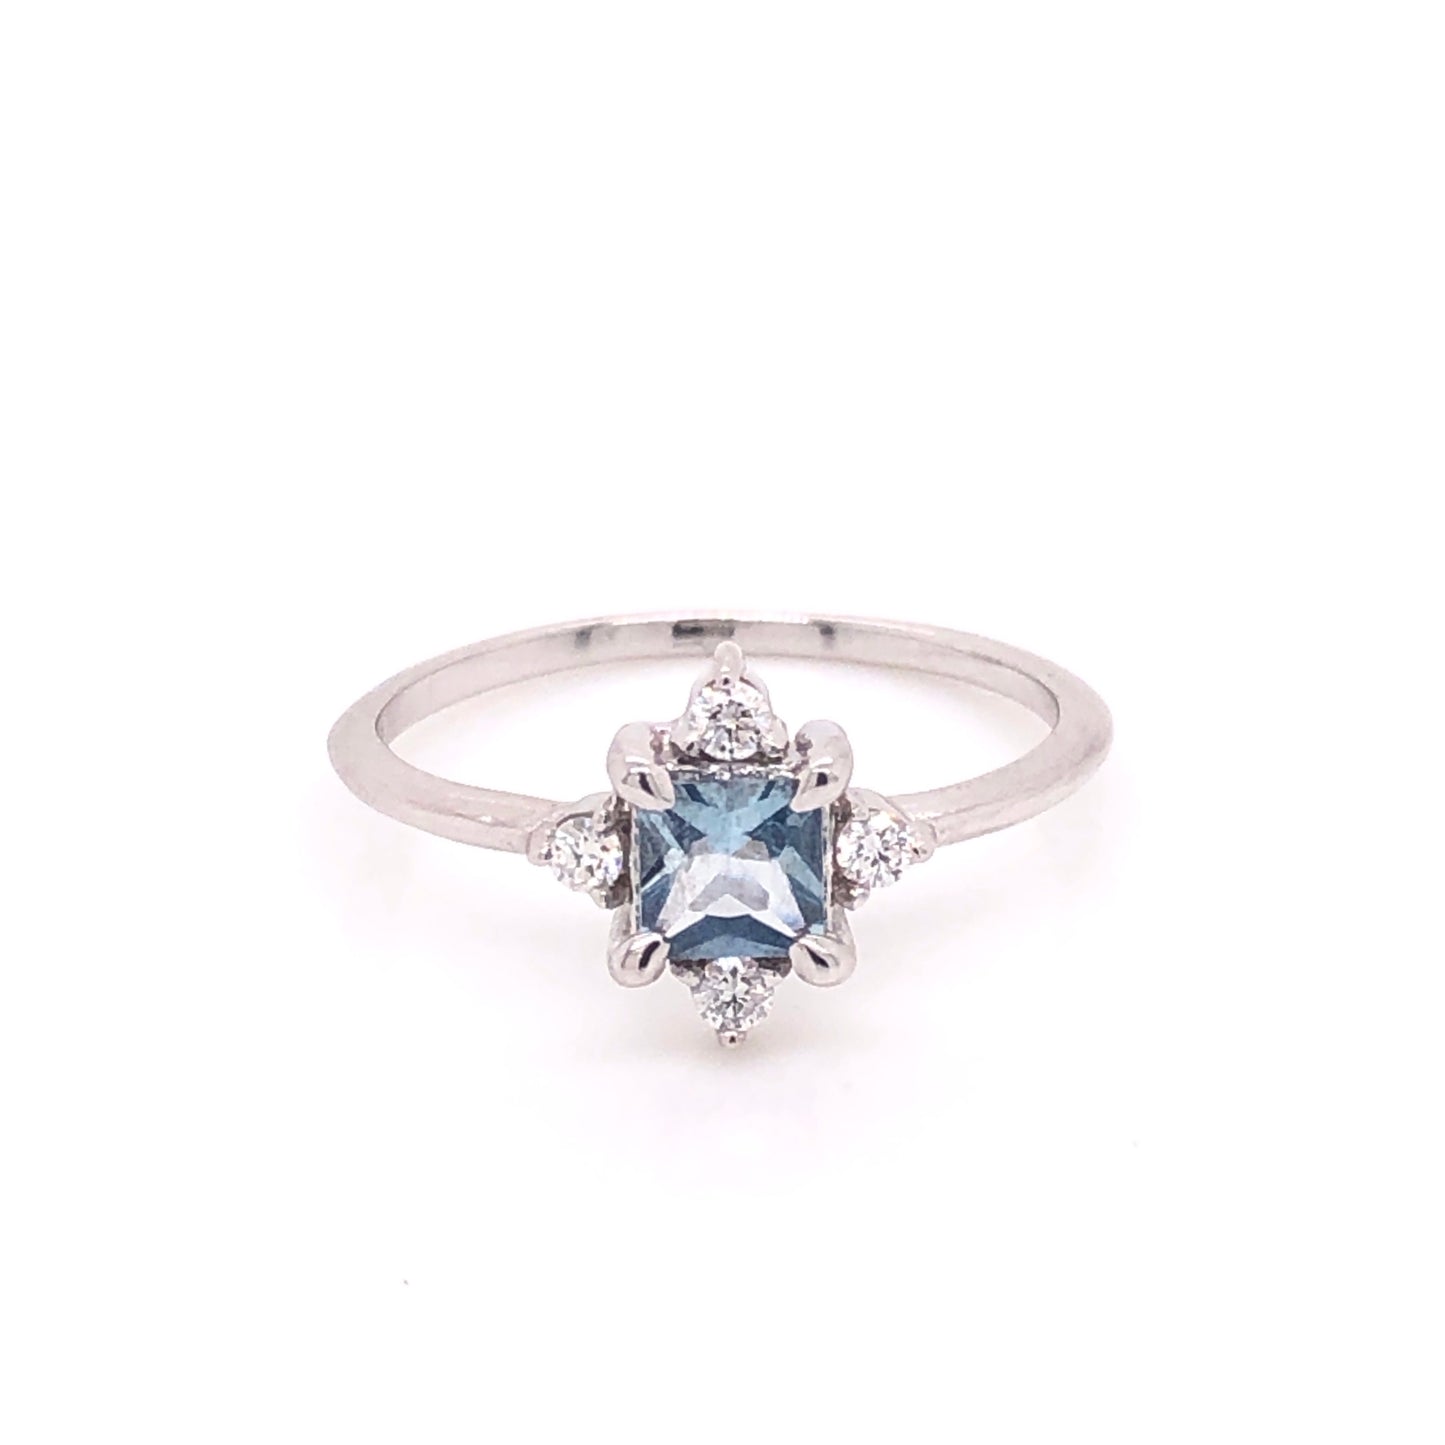 Marie Antoinette Aquamarine Ring (only 2 pieces available)